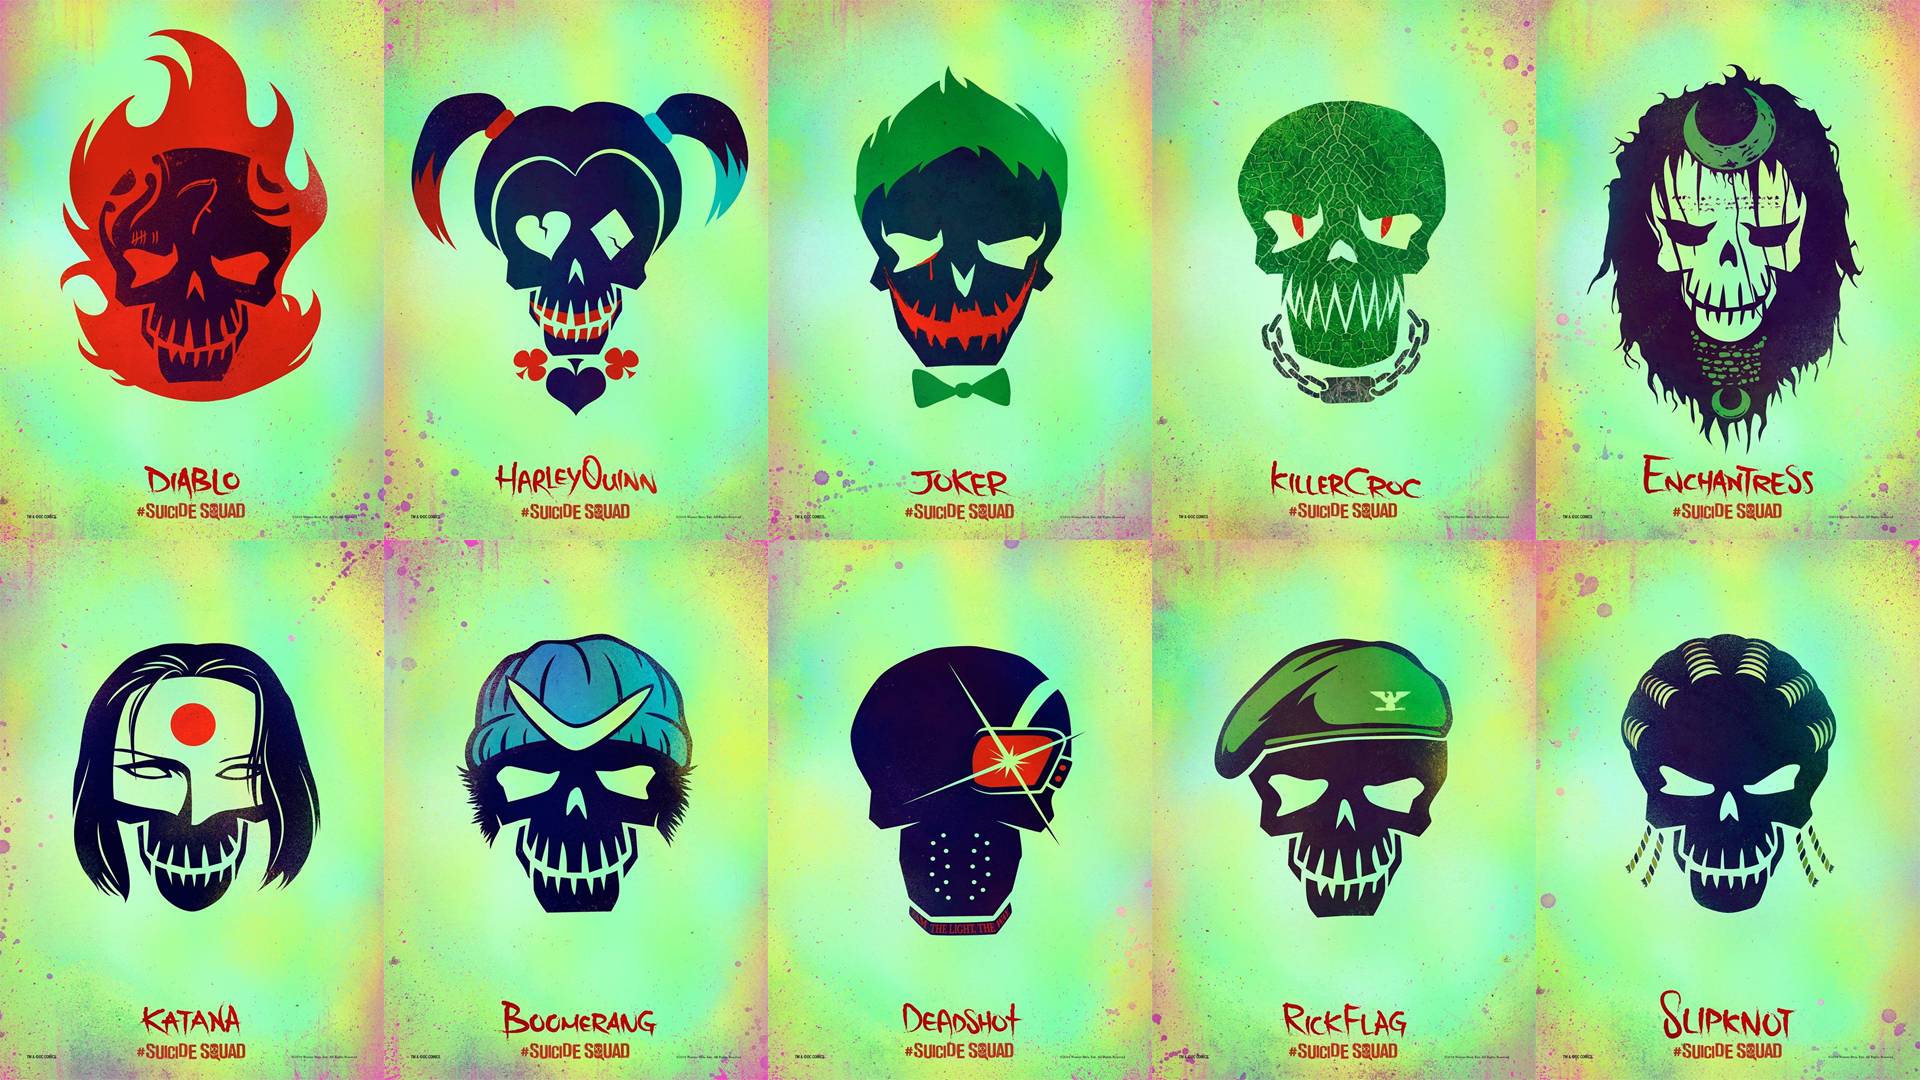 Wallpaper I made out of the new Suicide Squad posters